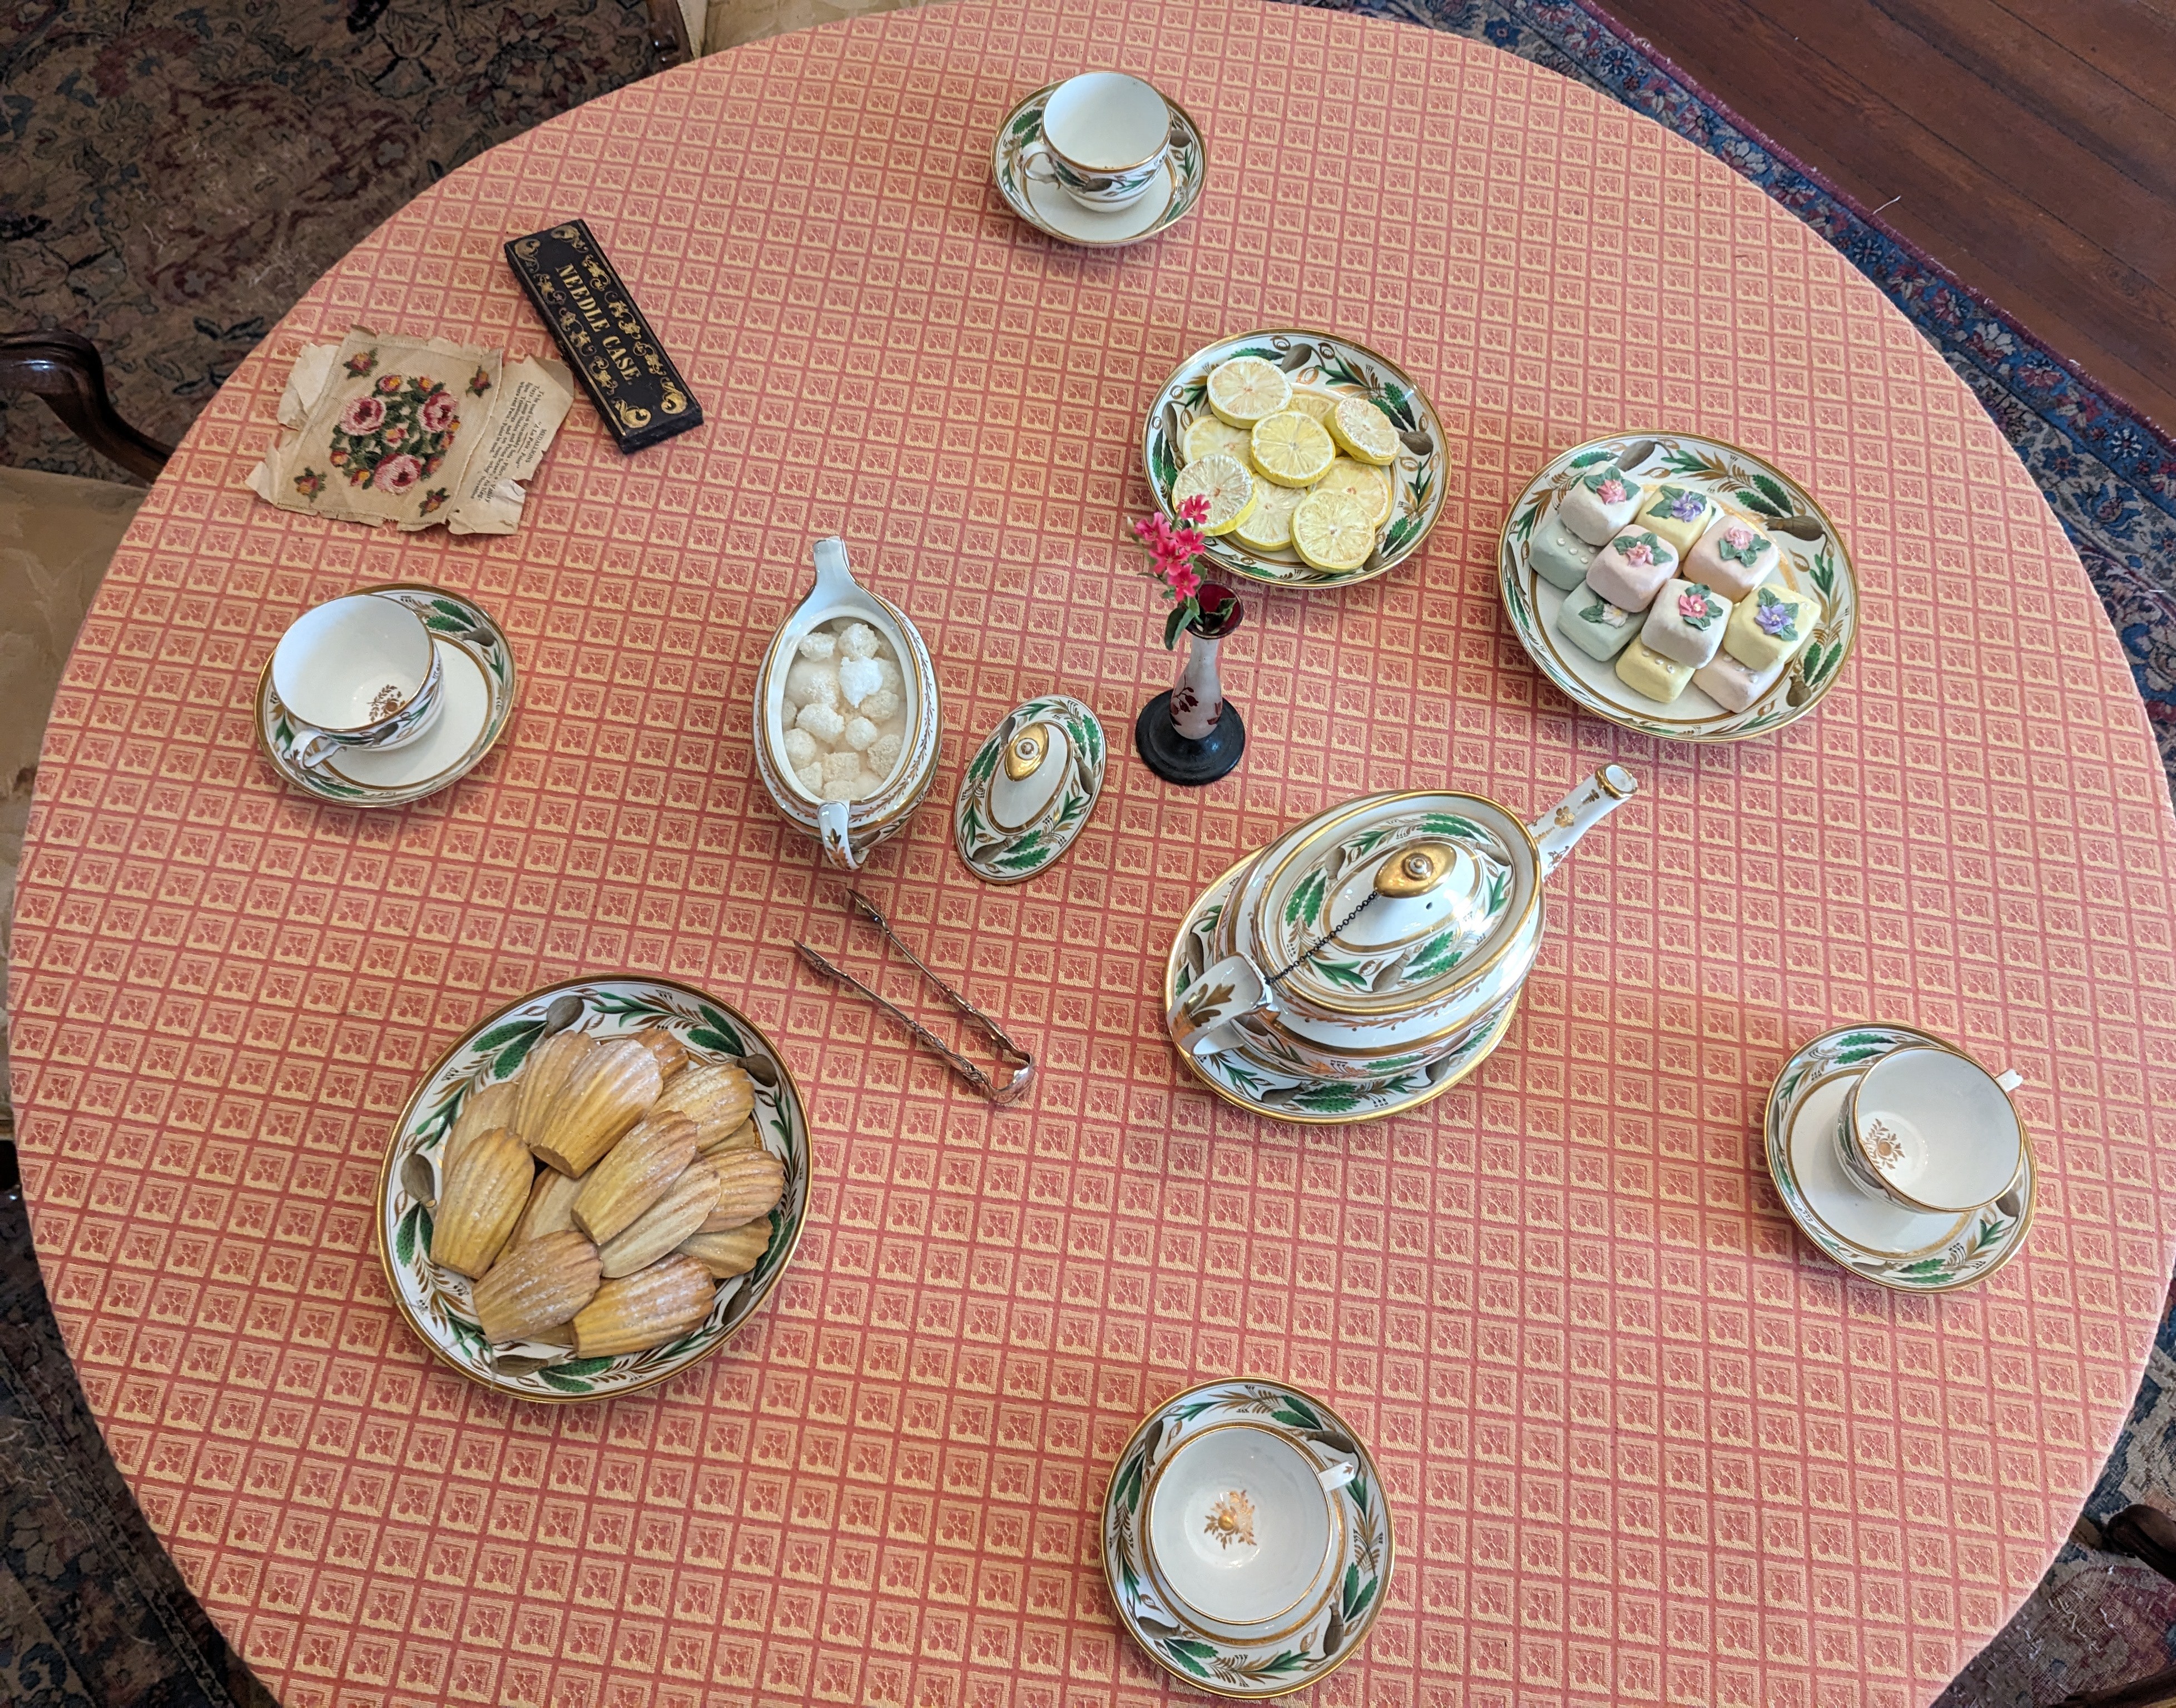 Overhead view of a tea setup with petit fours and madelines, tea cups on saucers, a teapot, sugar bowl, and creamer.